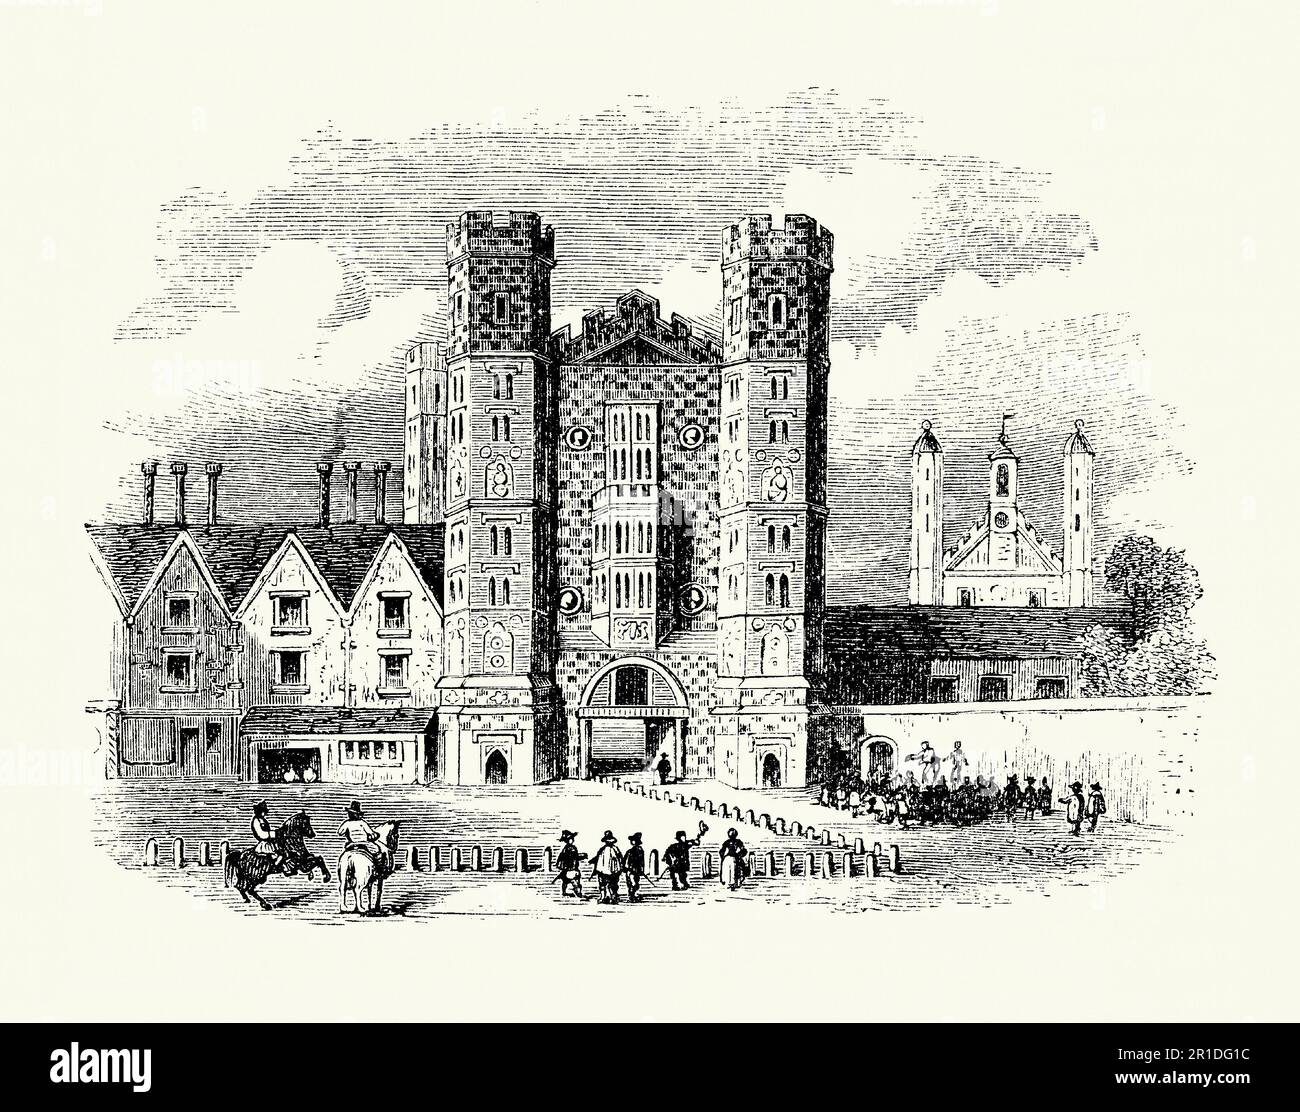 An old engraving of the Holbein Gate, Whitehall, Westminster, England, UK c. 1550. This massive gateway was constructed in 1531–2 in the English Gothic style. The Holbein Gate (also known as the King's Gate or the Cockpit Gate) and Westminster Gate were constructed by Henry VIII to connect parts of the Tudor Palace of Whitehall. The gateway was one of two substantial parts of the Palace to survive a catastrophic fire in January 1698. It was demolished in 1759. Stock Photo